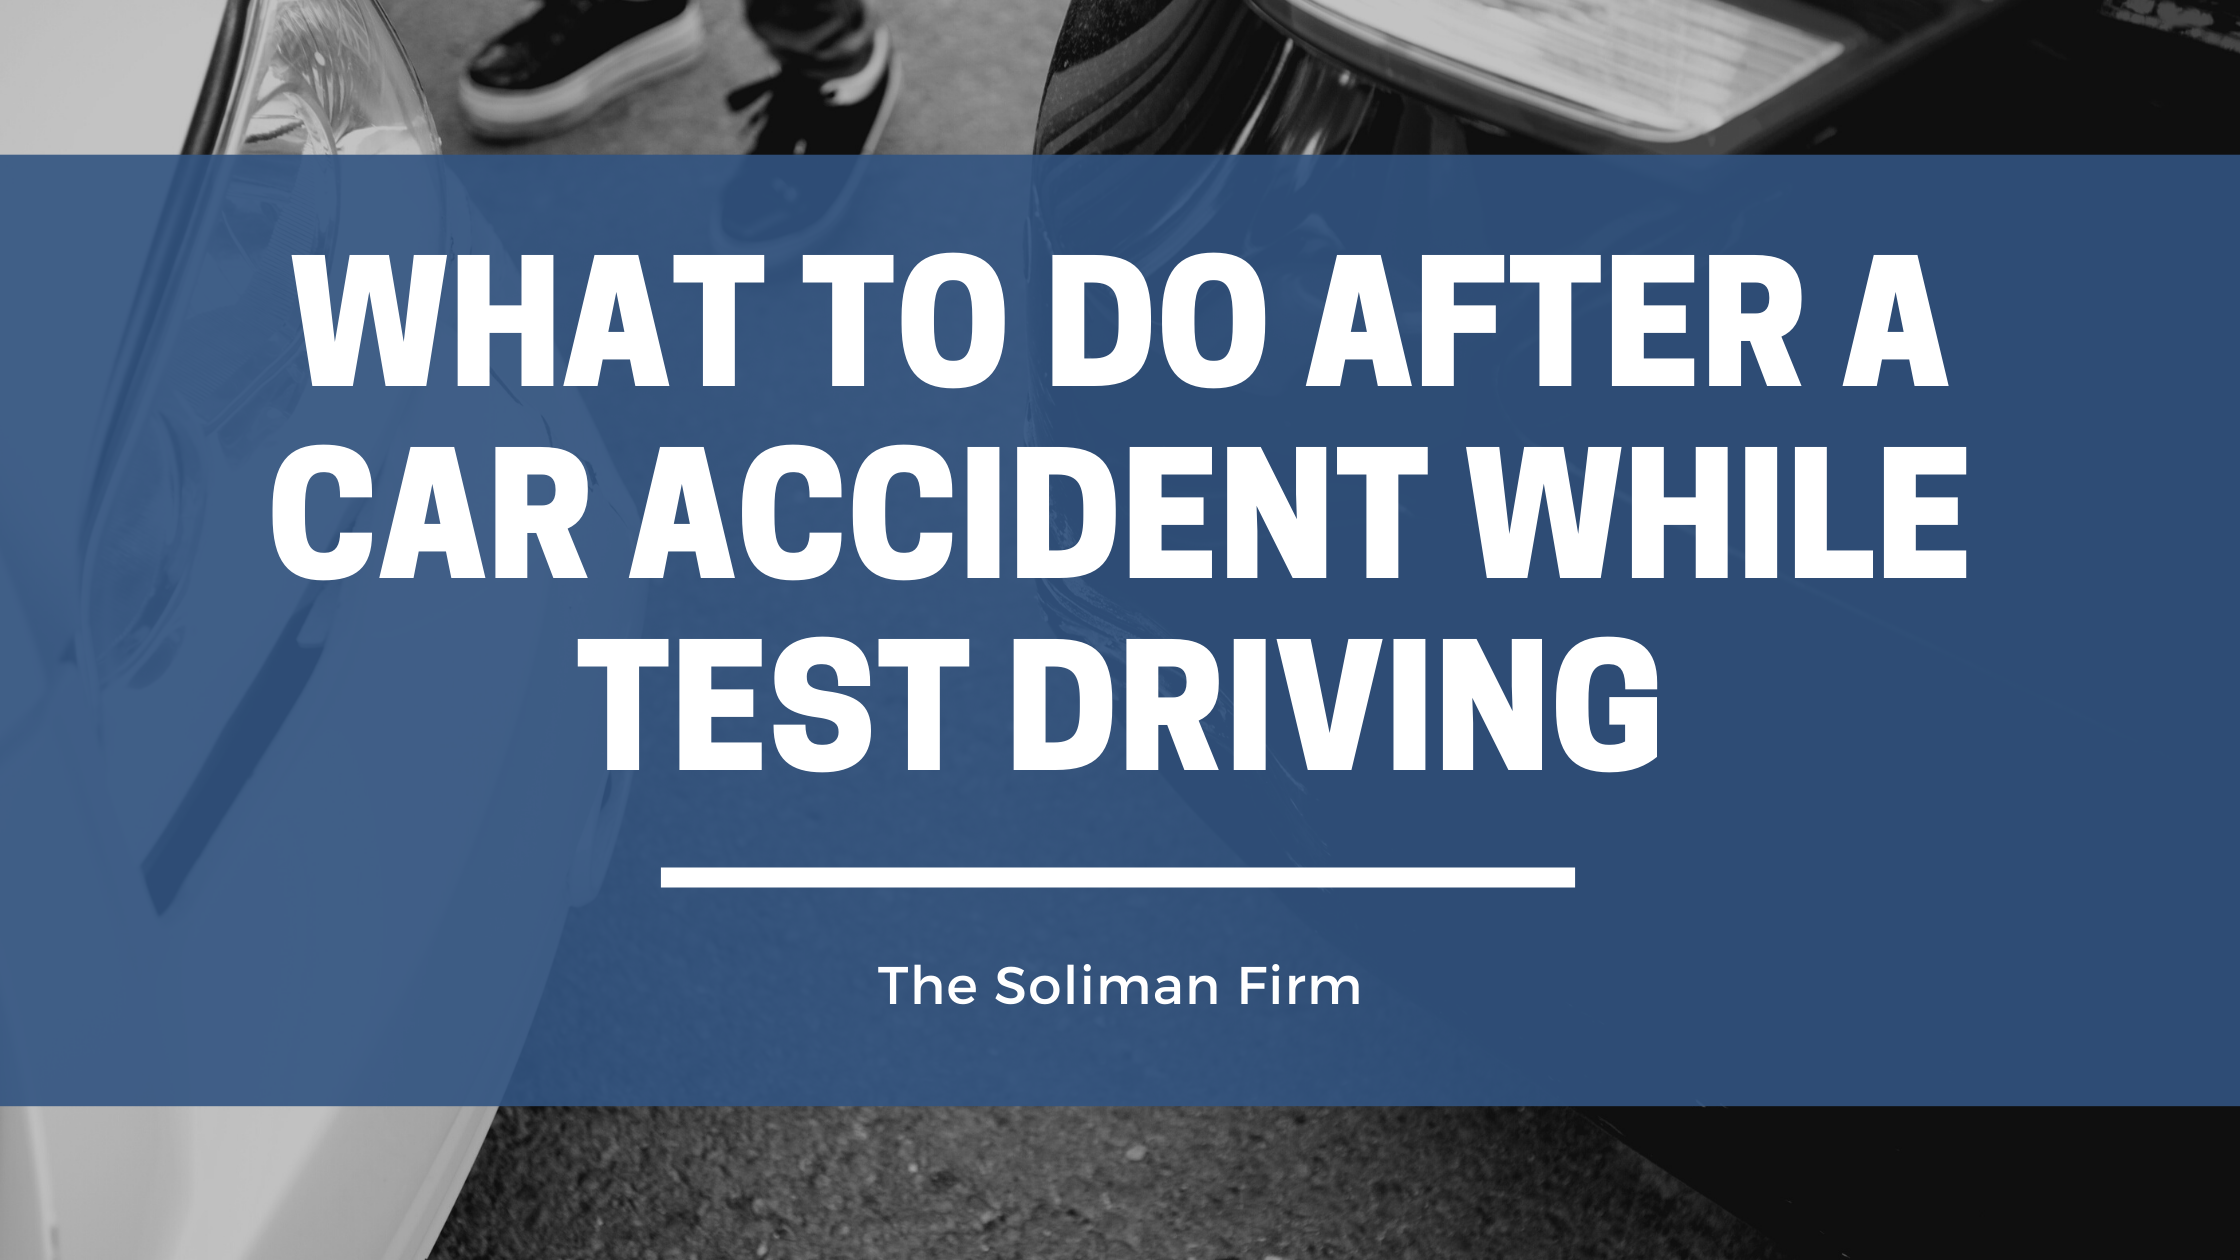 What to Do After a Car Accident While Test Driving